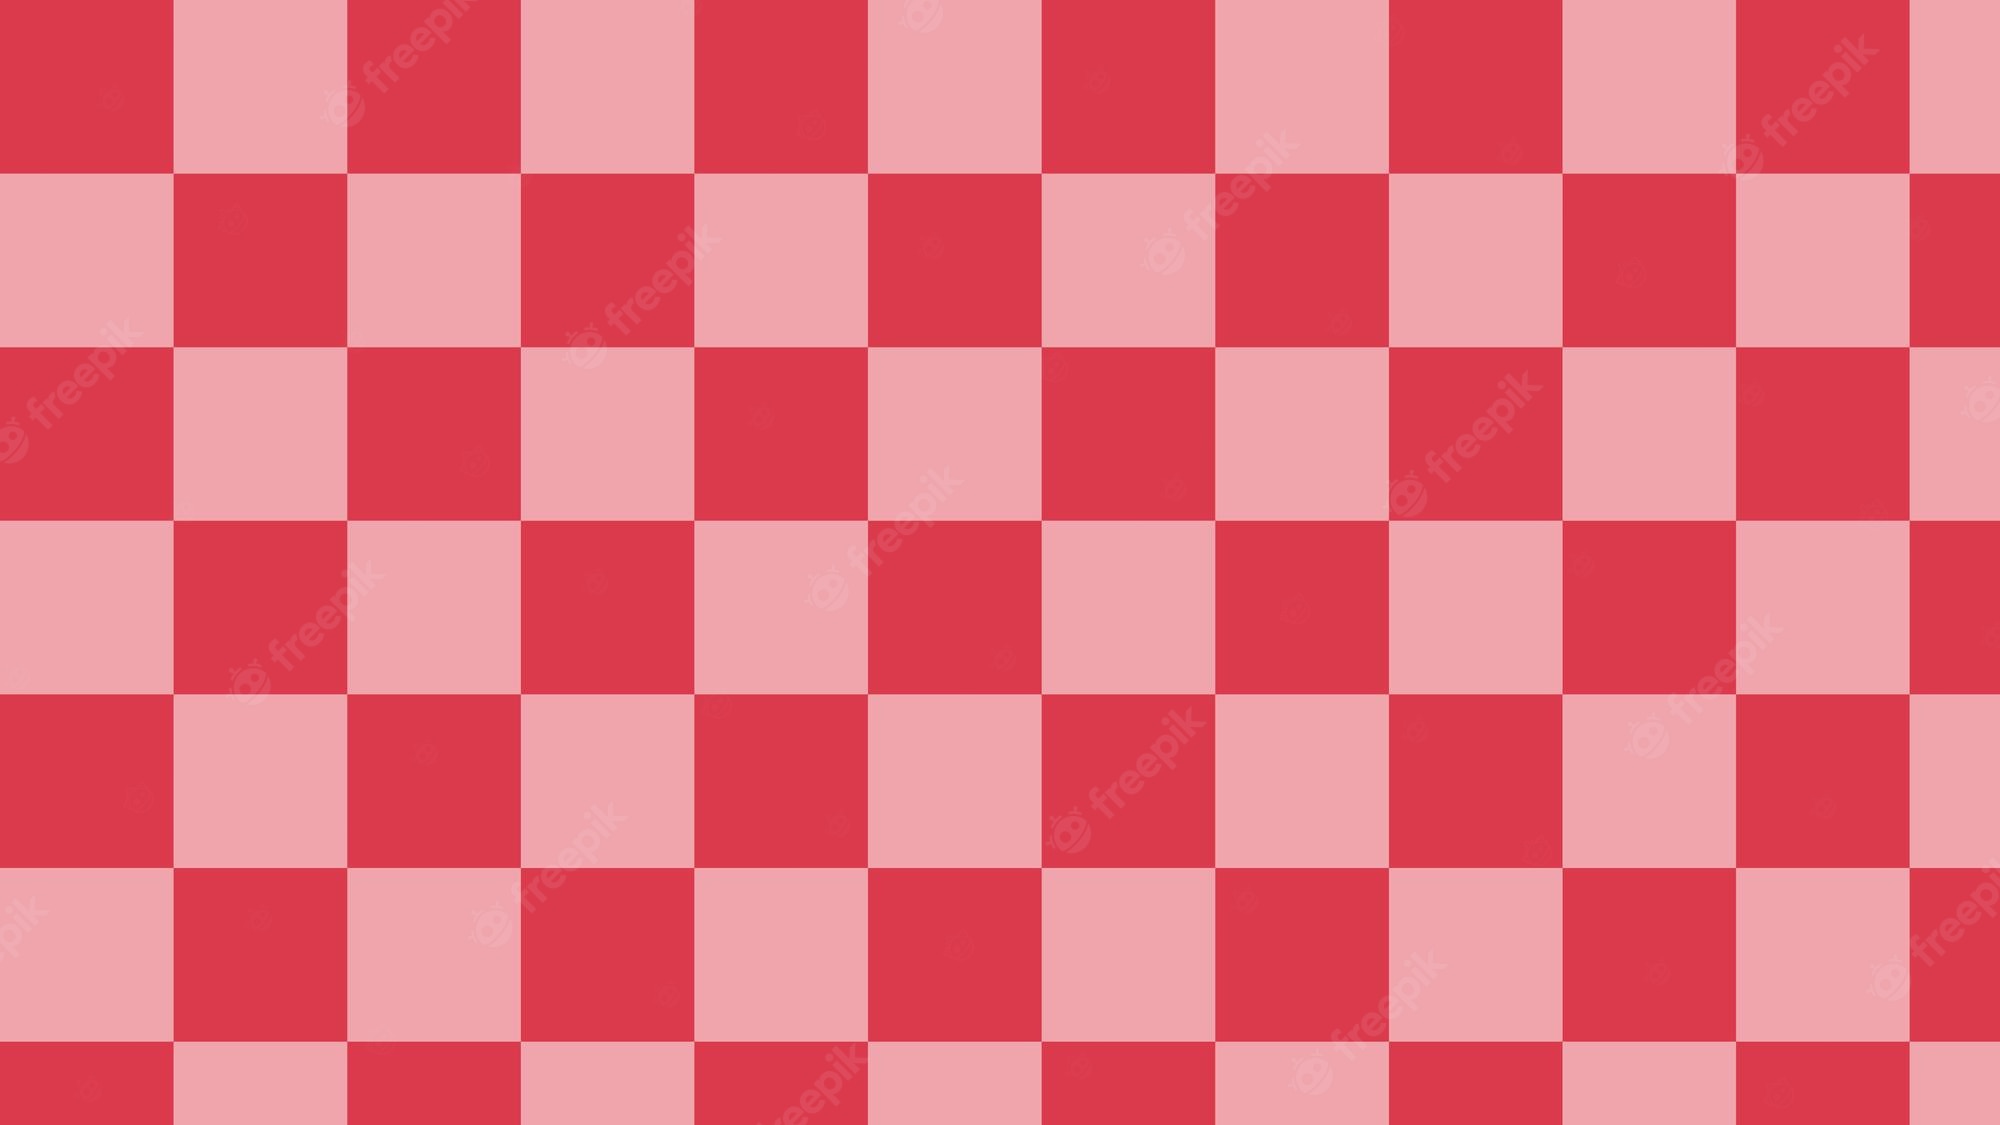 Download Free 100 + red checkered wallpaper